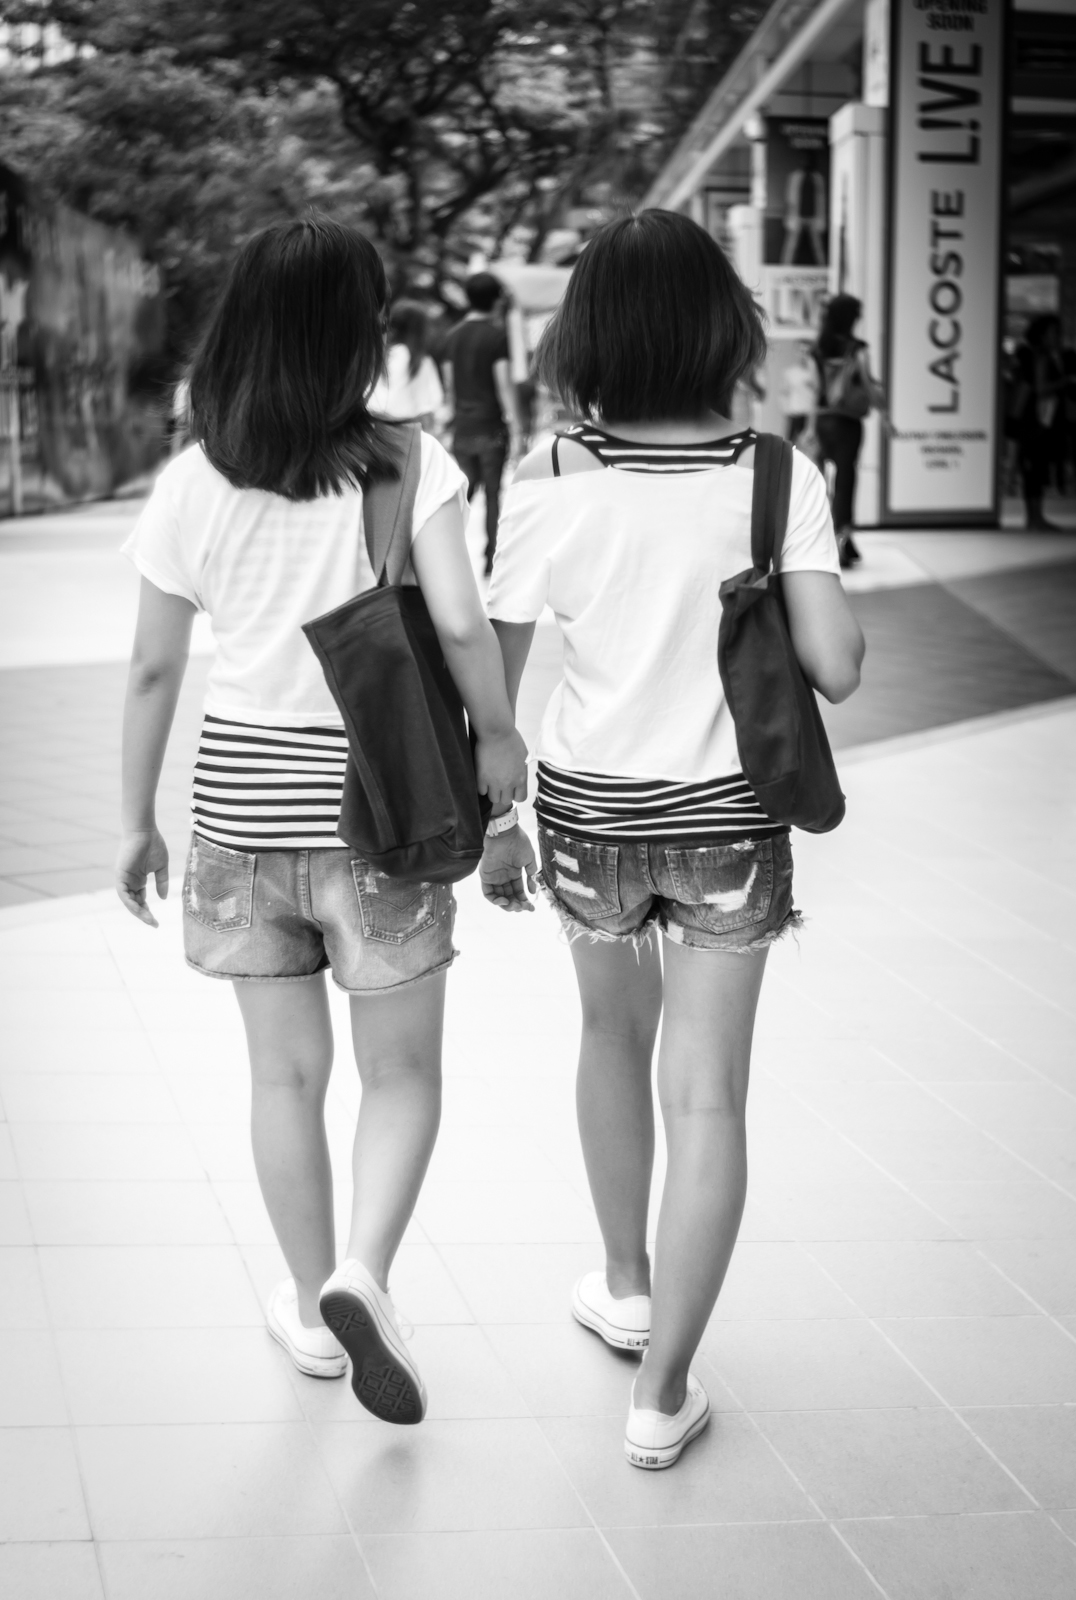 Two girls in almost identical clothing, shoes and bags